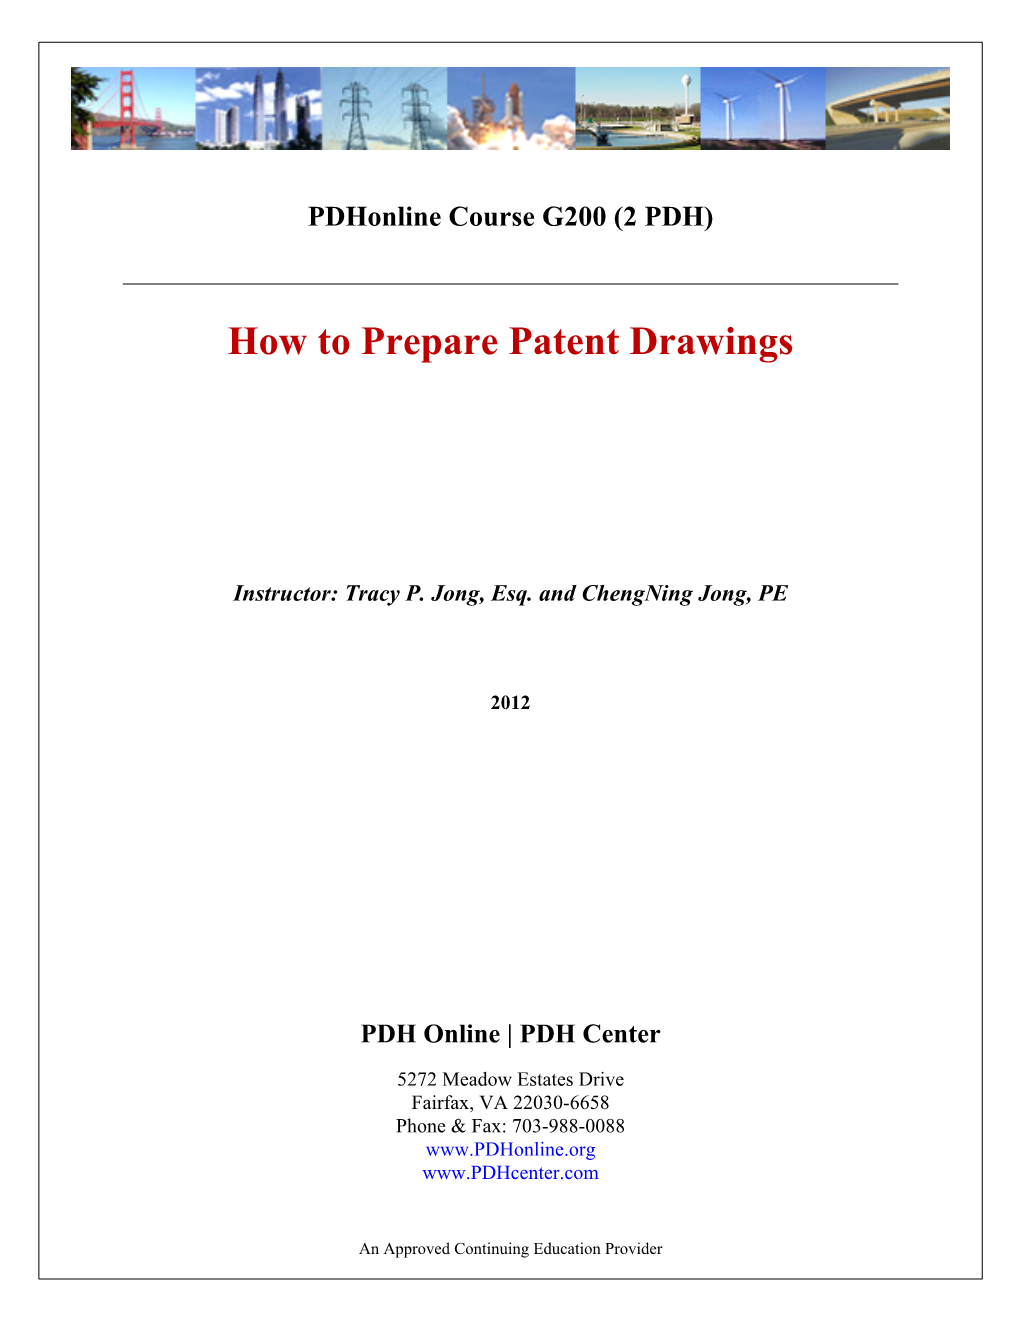 How to Prepare Patent Drawings